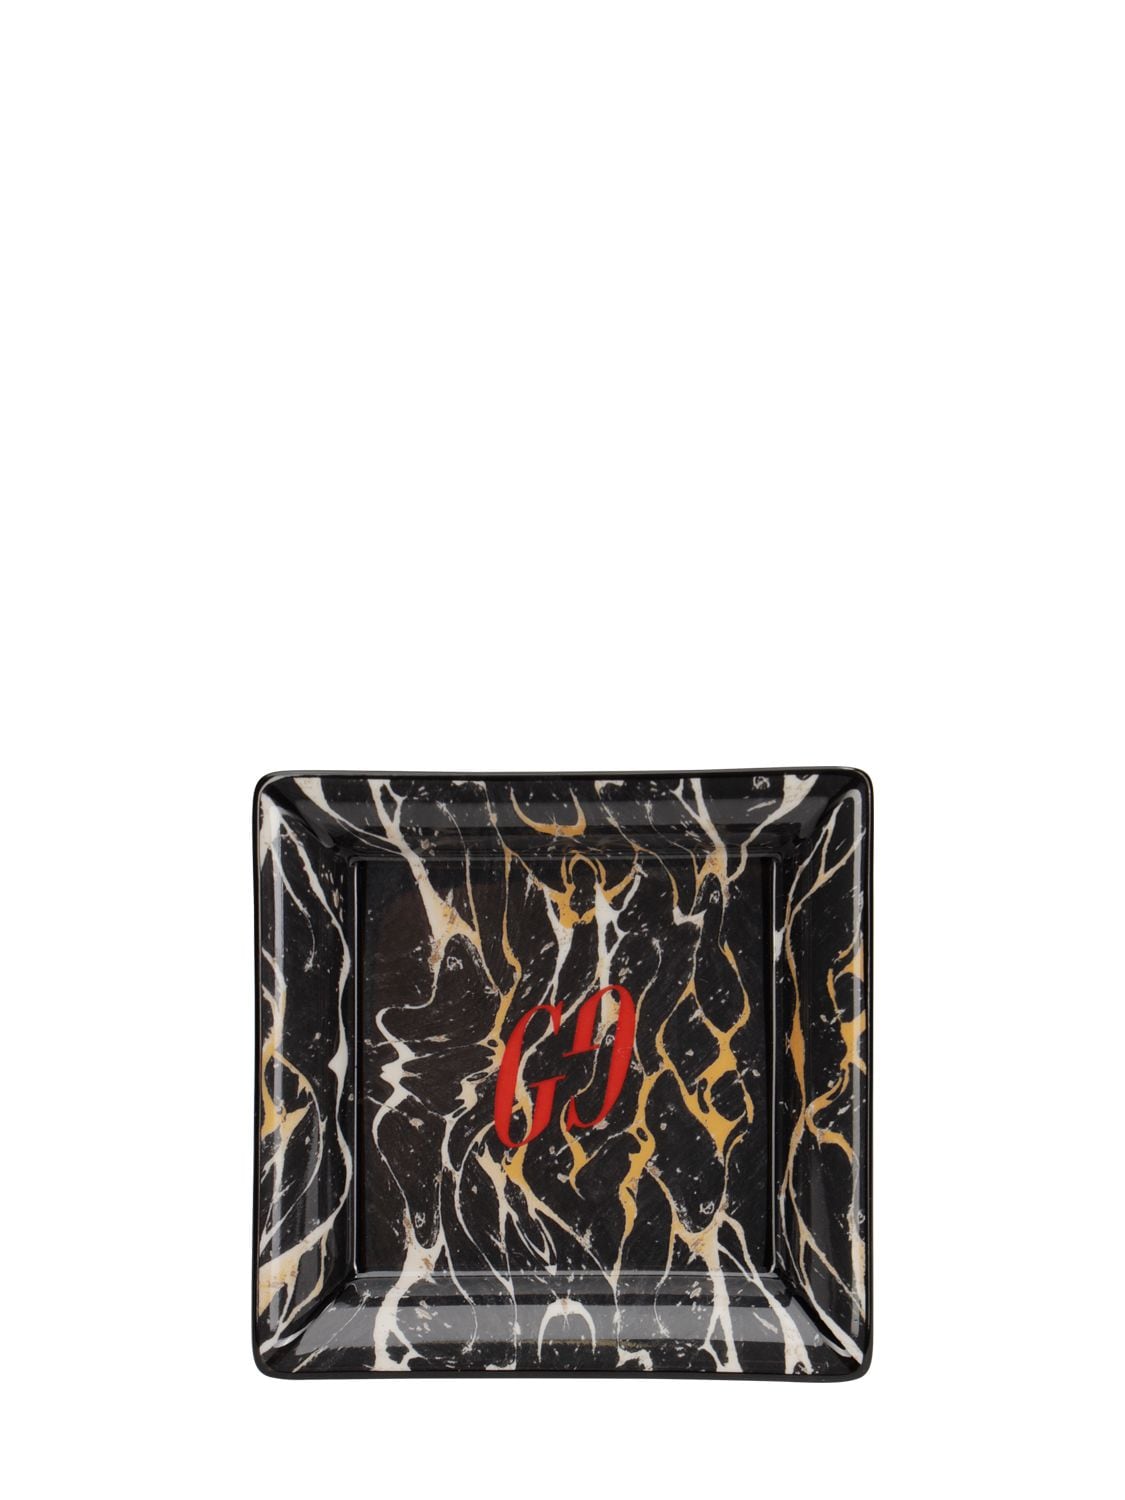 Gucci Hand-painted Marble Effect Tray In Black,multi